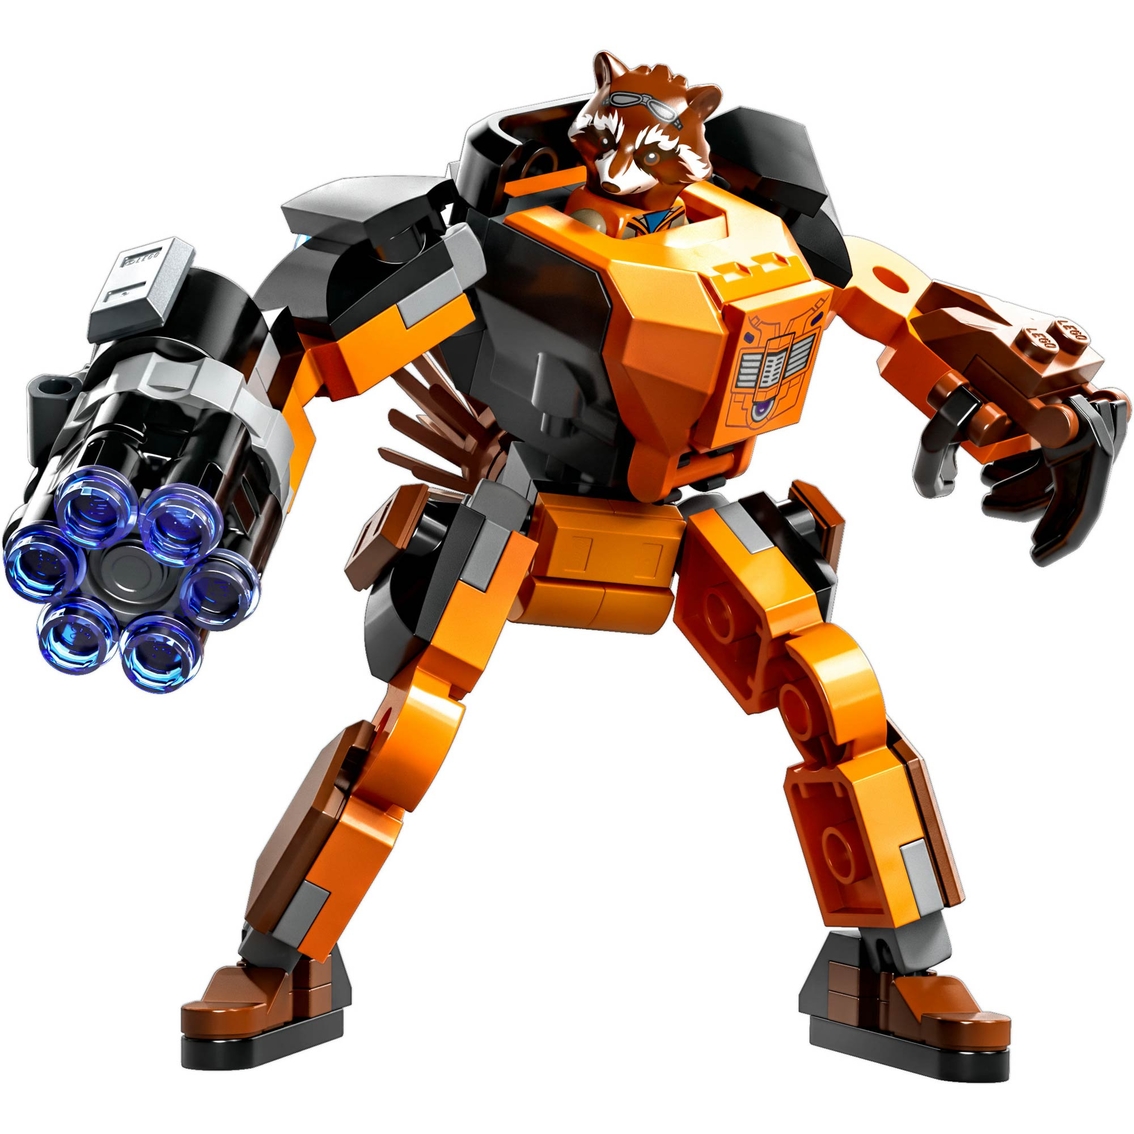 LEGO Super Heroes Rocket Mech Armor Building Toy 76243 - Image 2 of 2